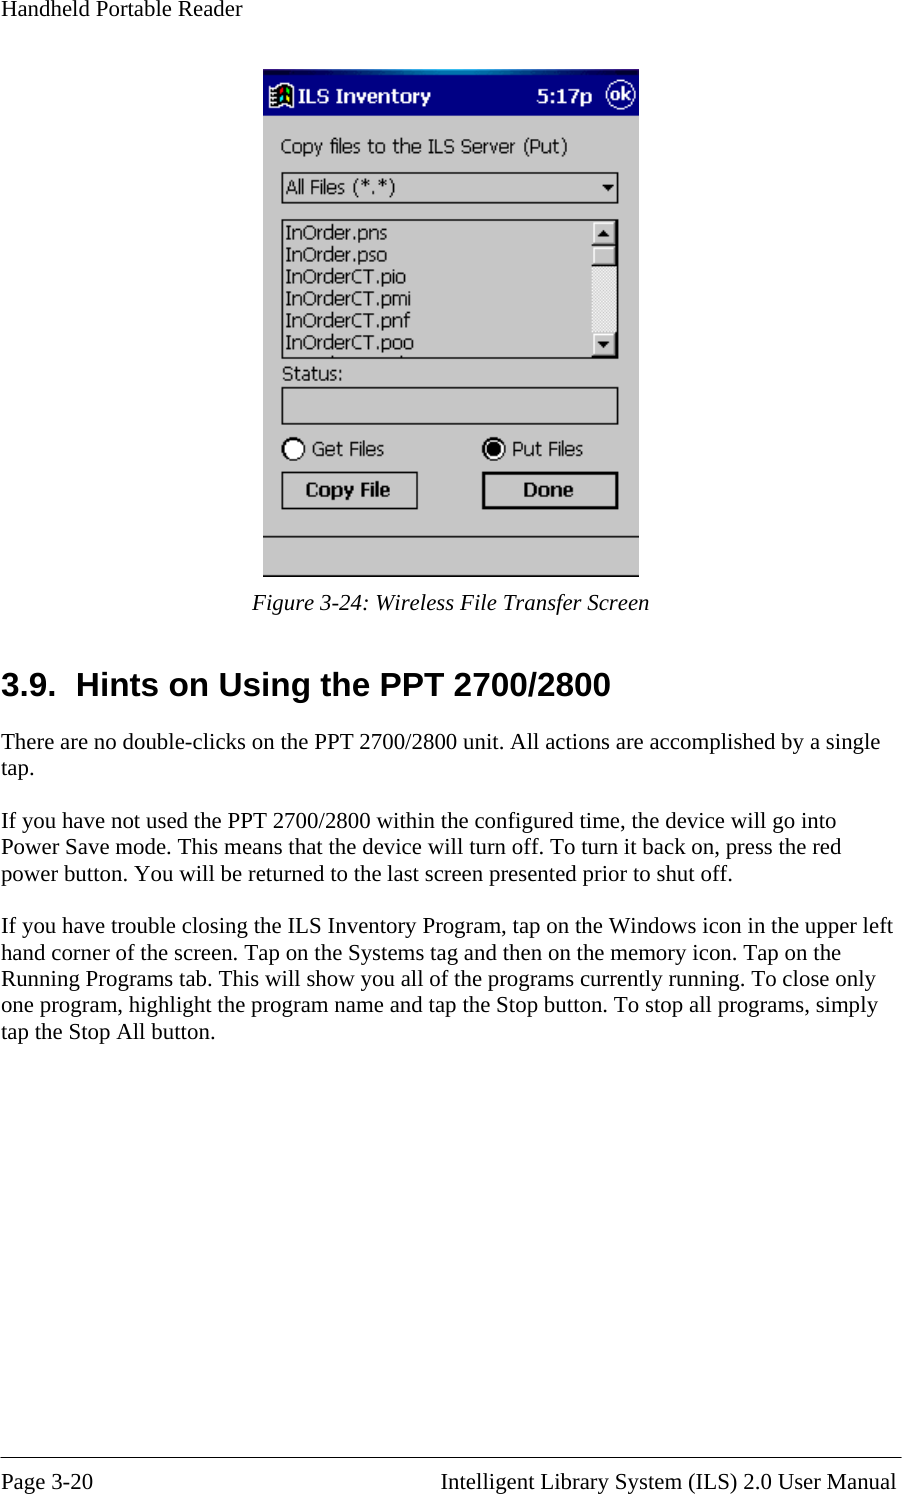 Handheld Portable Reader  Figure 3-24: Wireless File Transfer Screen 3.9.  Hints on Using the PPT 2700/2800 There are no double-clicks on  re accomplished by a single 800 within the configured time, the device will go into press the red ior to shut off. e Windows icon in the upper left ll button. the PPT 2700/2800 unit. All actions atap.  If you have not used the PPT 2700/2Power Save mode. This means that the device will turn off. To turn it back on, power button. You will be returned to the last screen presented pr If you have trouble closing the ILS Inventory Program, tap on thhand corner of the screen. Tap on the Systems tag and then on the memory icon. Tap on the Running Programs tab. This will show you all of the programs currently running. To close only one program, highlight the program name and tap the Stop button. To stop all programs, simply tap the Stop A  Page 3-20                                                       Intelligent Library System (ILS) 2.0 User Manual 